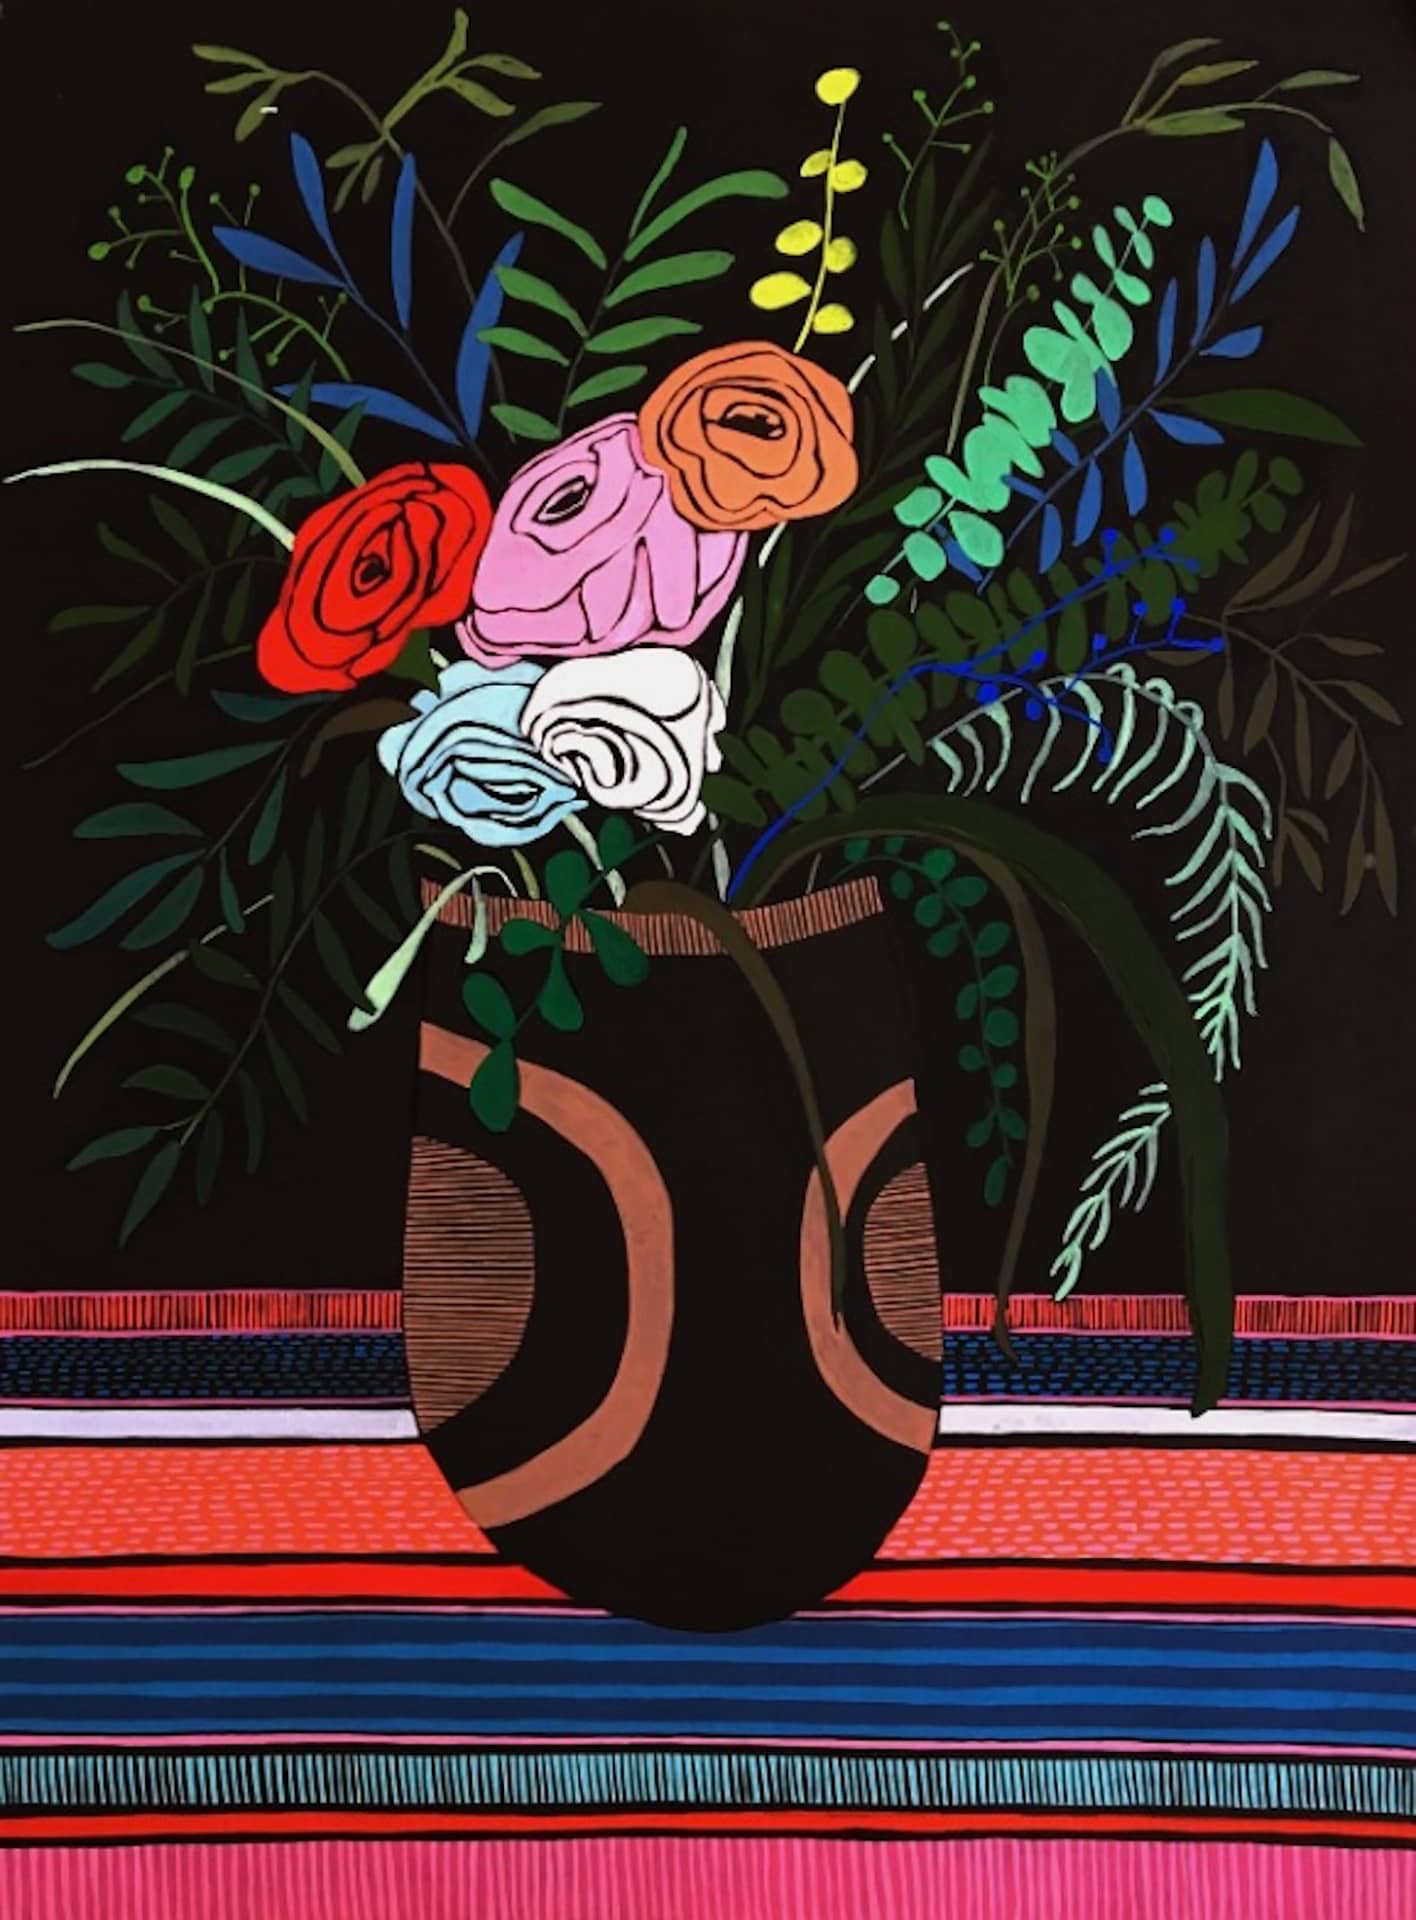 Flowers_2_mary_finlayson_Gouache_on_Paper-22×16.5_inches_unframed